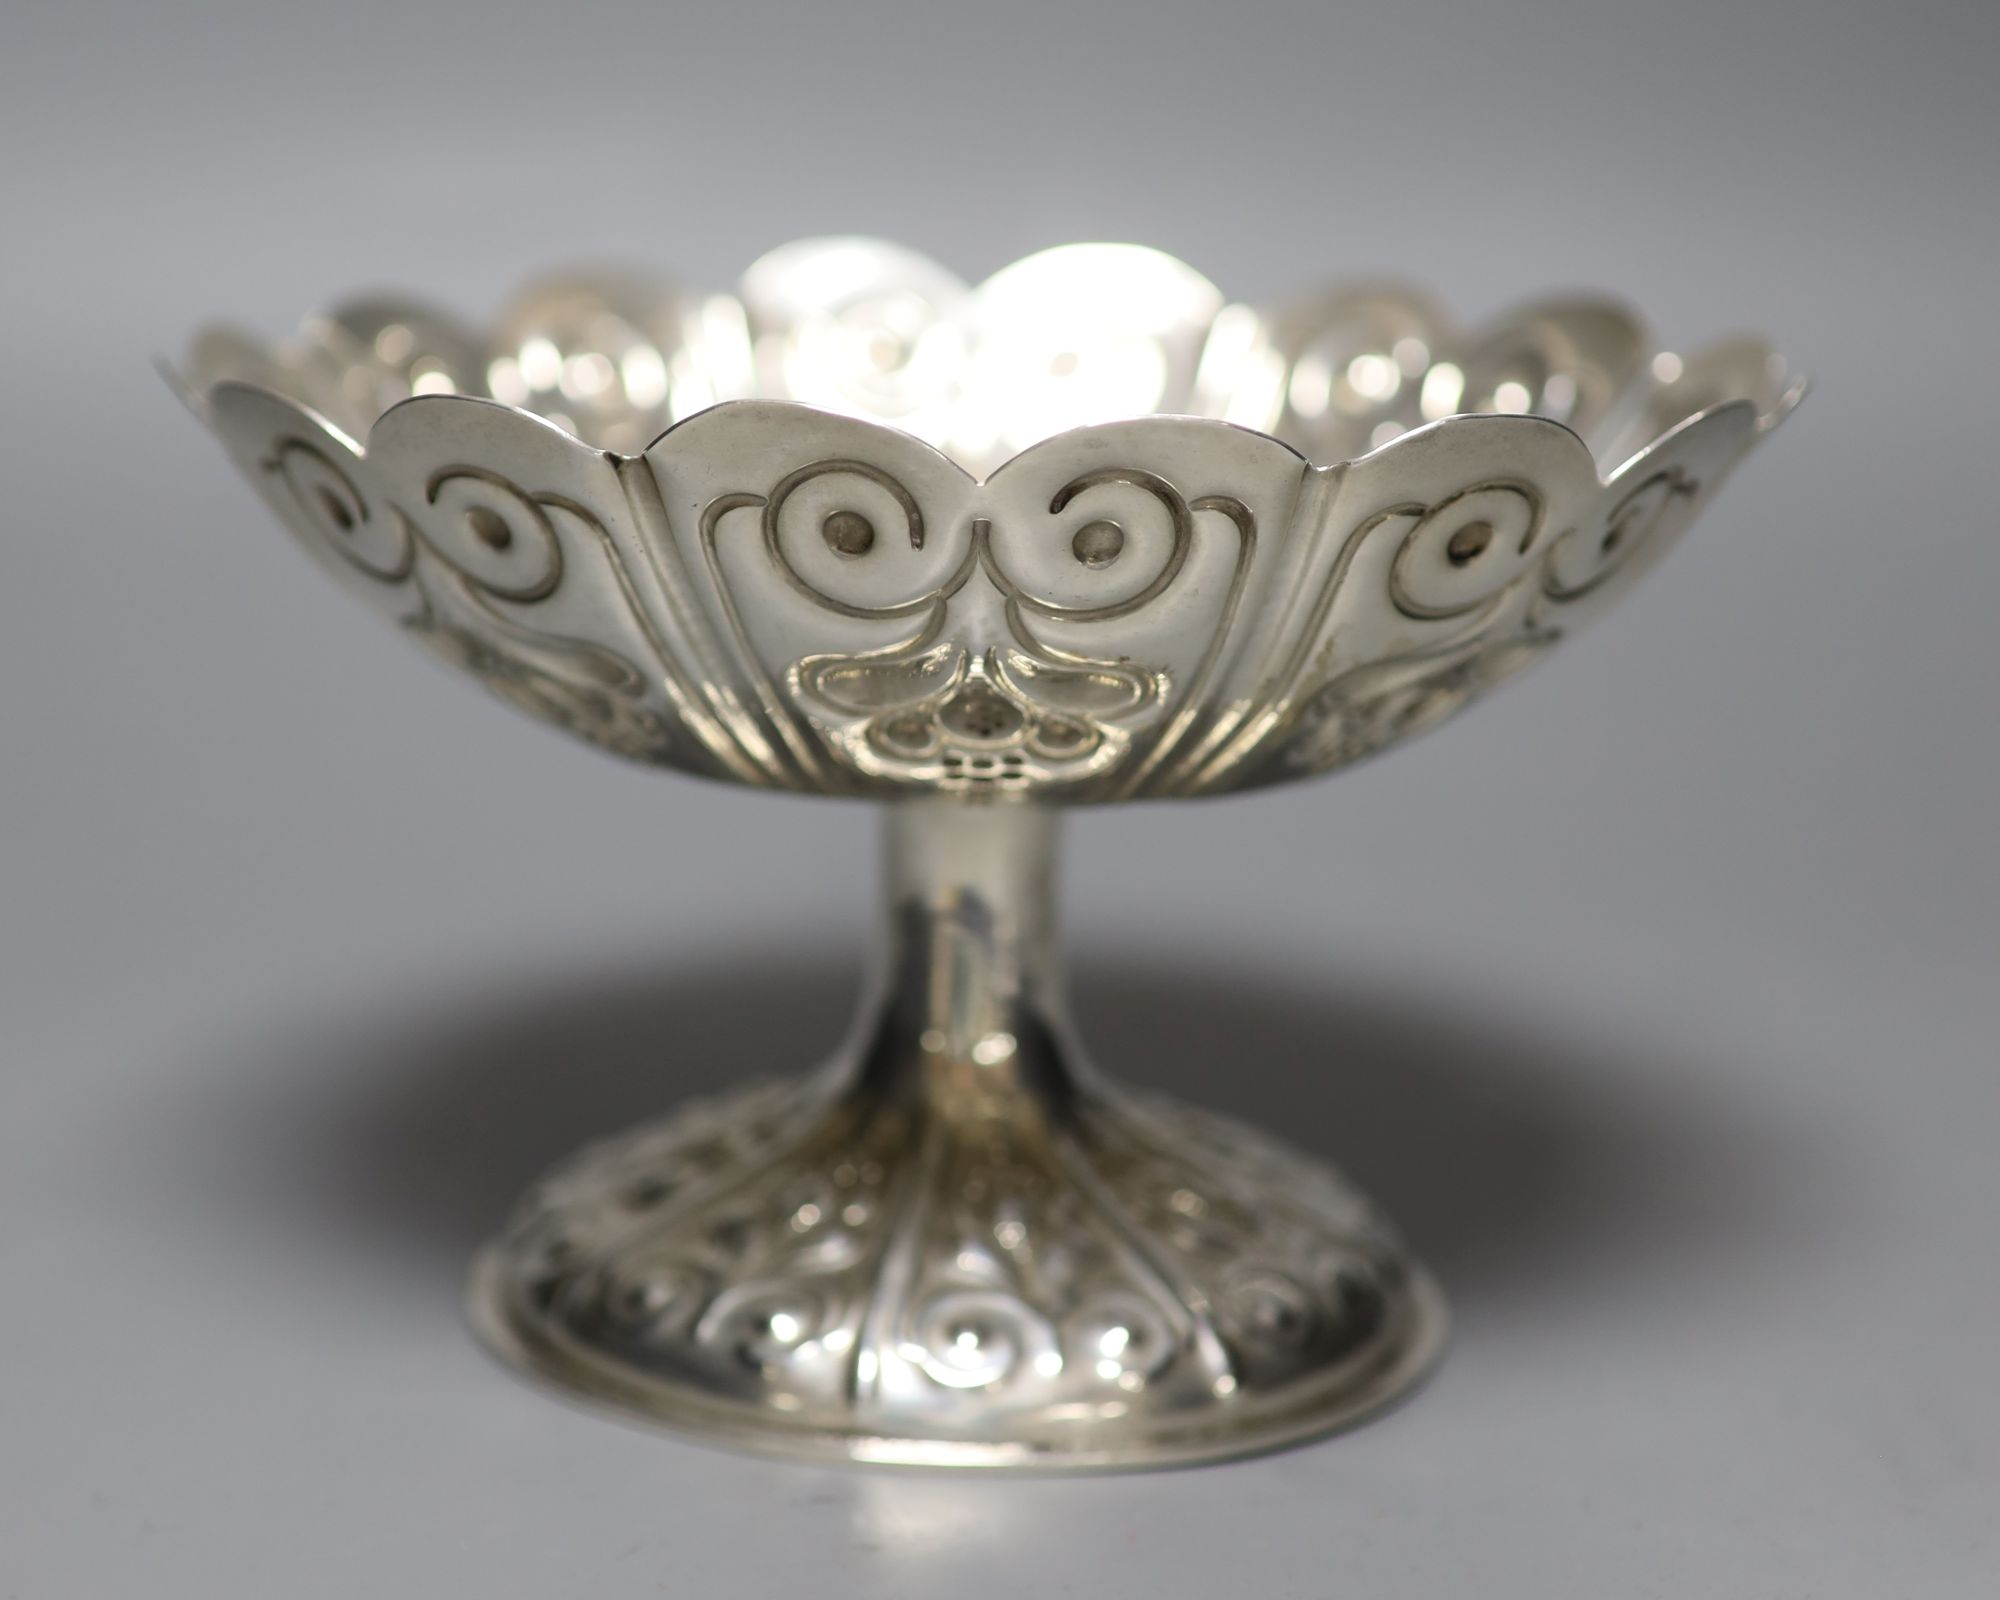 An Edwardian embossed silver circular pedestal dish of lobed form, George Nathan & Ridley Hayes, Chester 1906, 11.78oz.